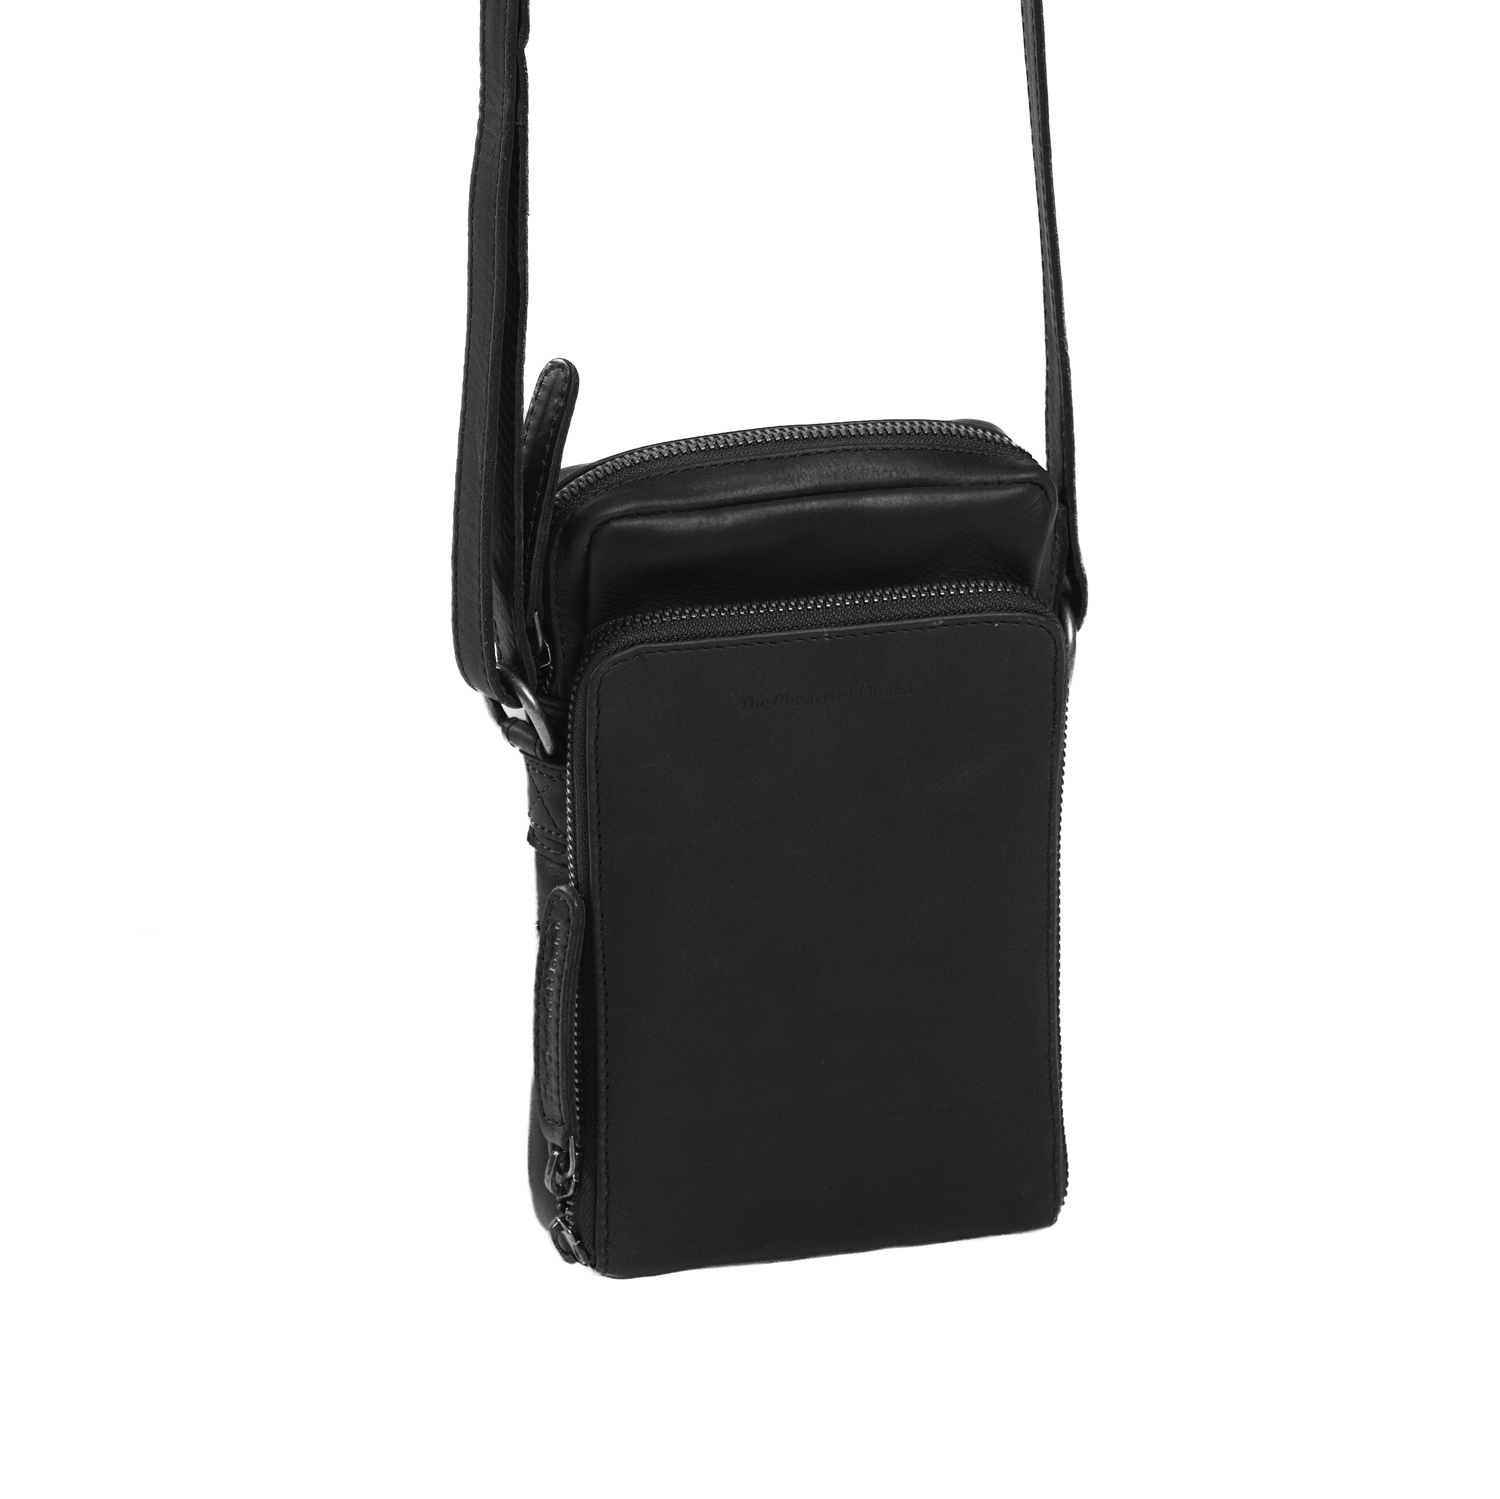 Leather Phone Pouch Black Hamilton - The Chesterfield Brand